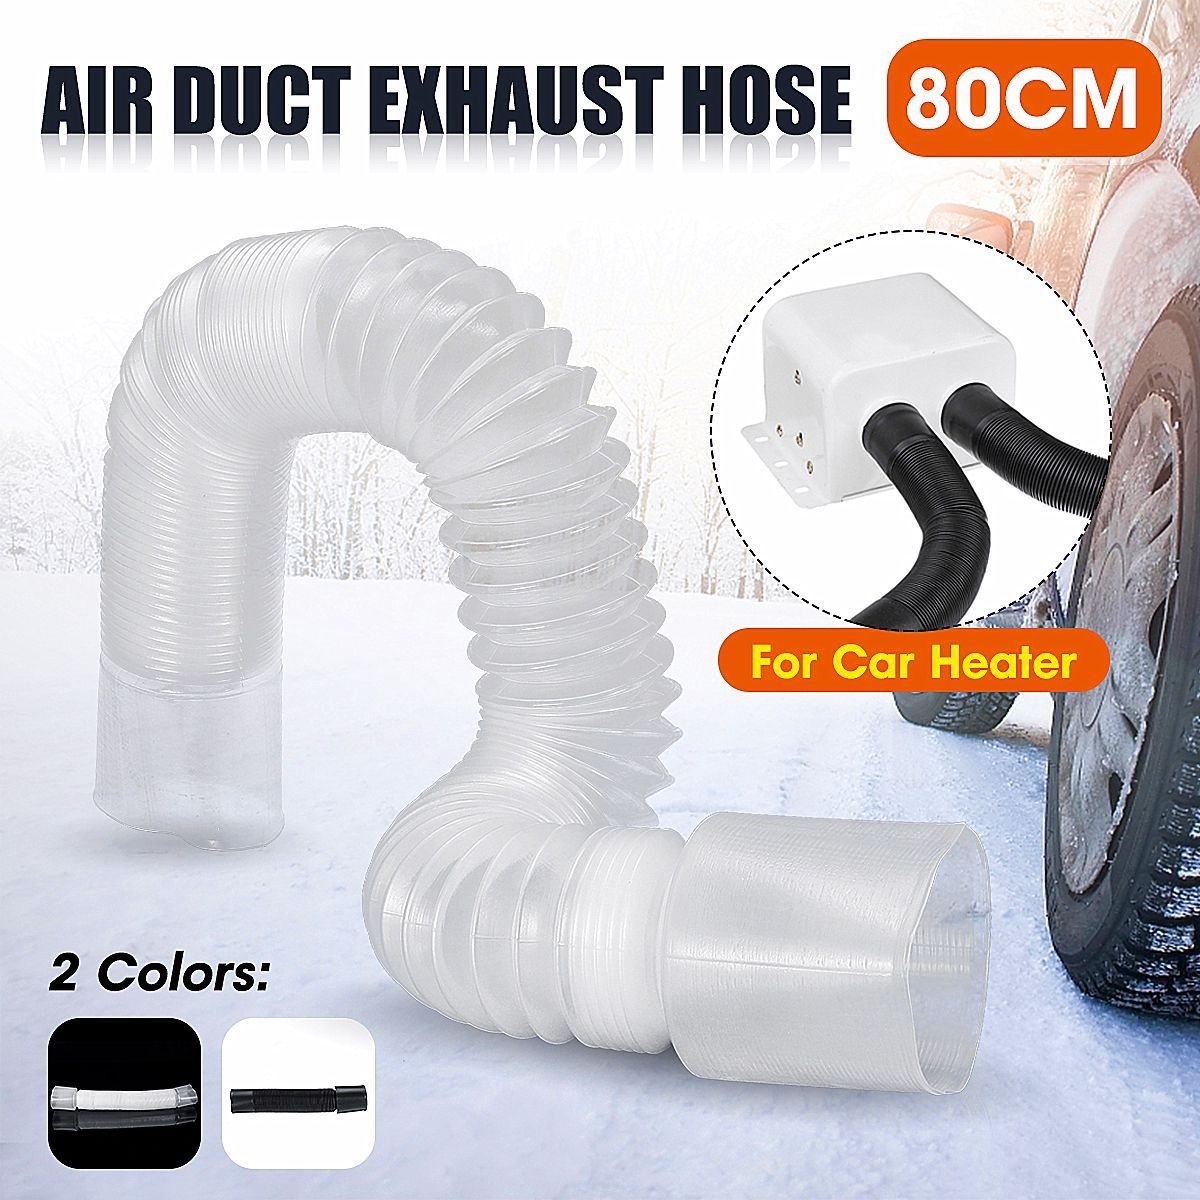 12V-24V-Car-Heater-Fan-Air-Duct-Exhaust-Hose-Stretched-Up-to-80cm-1599533